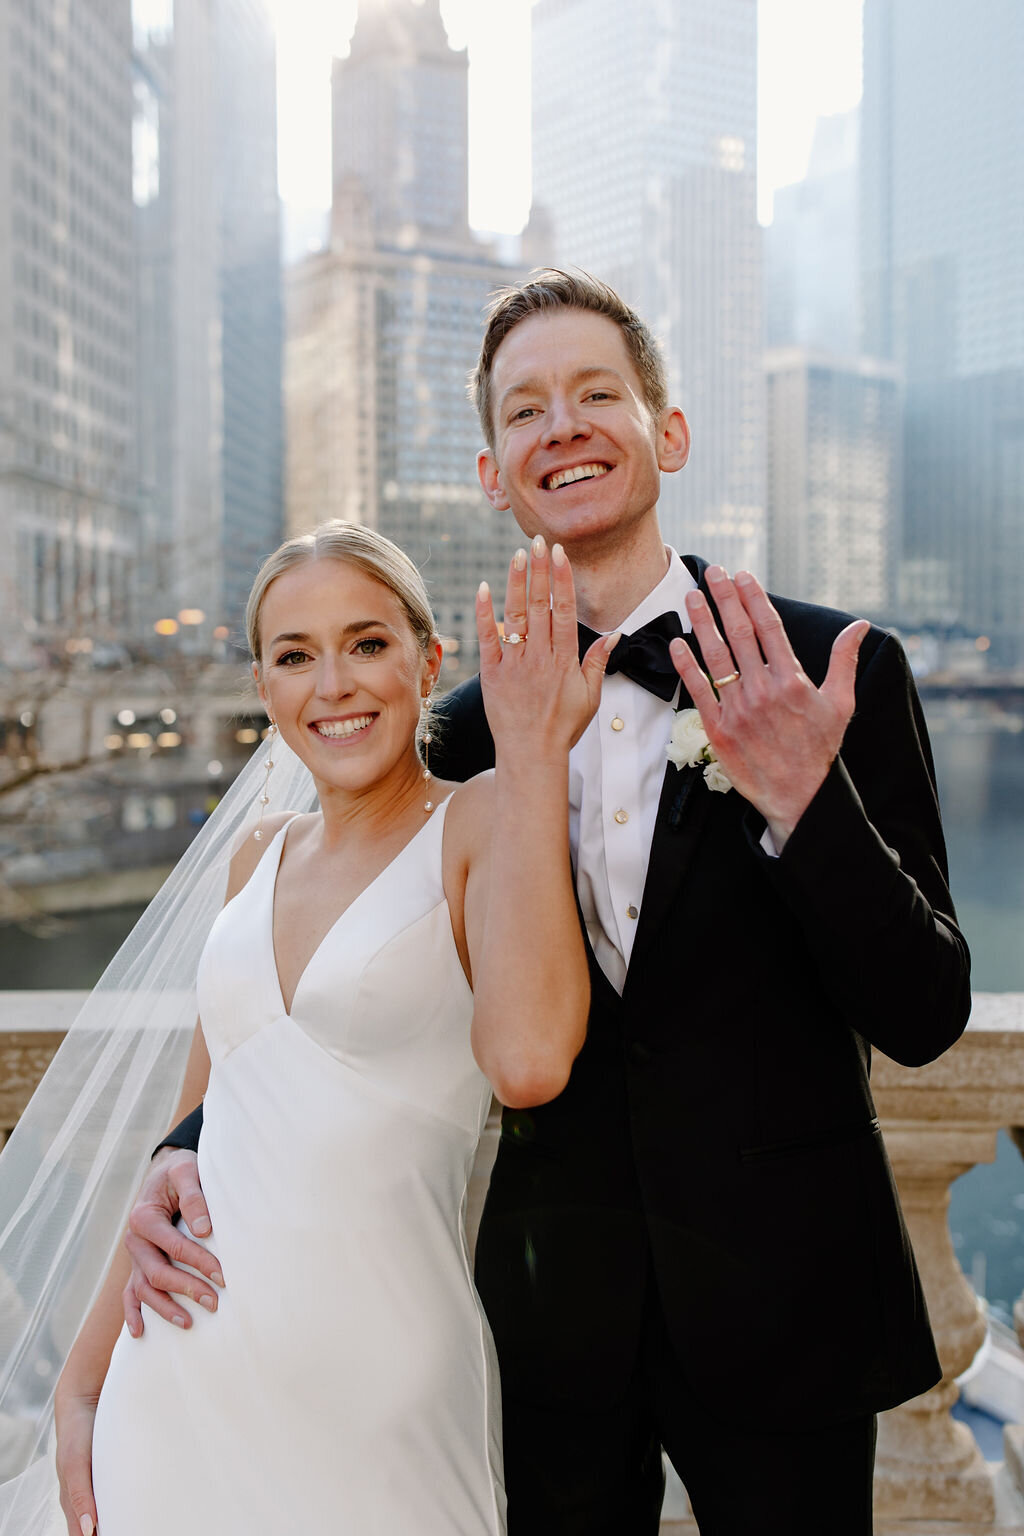 Bride and groom smile to camera and hold up hands to indicate their wedding rings while overlooking Chicago skyline